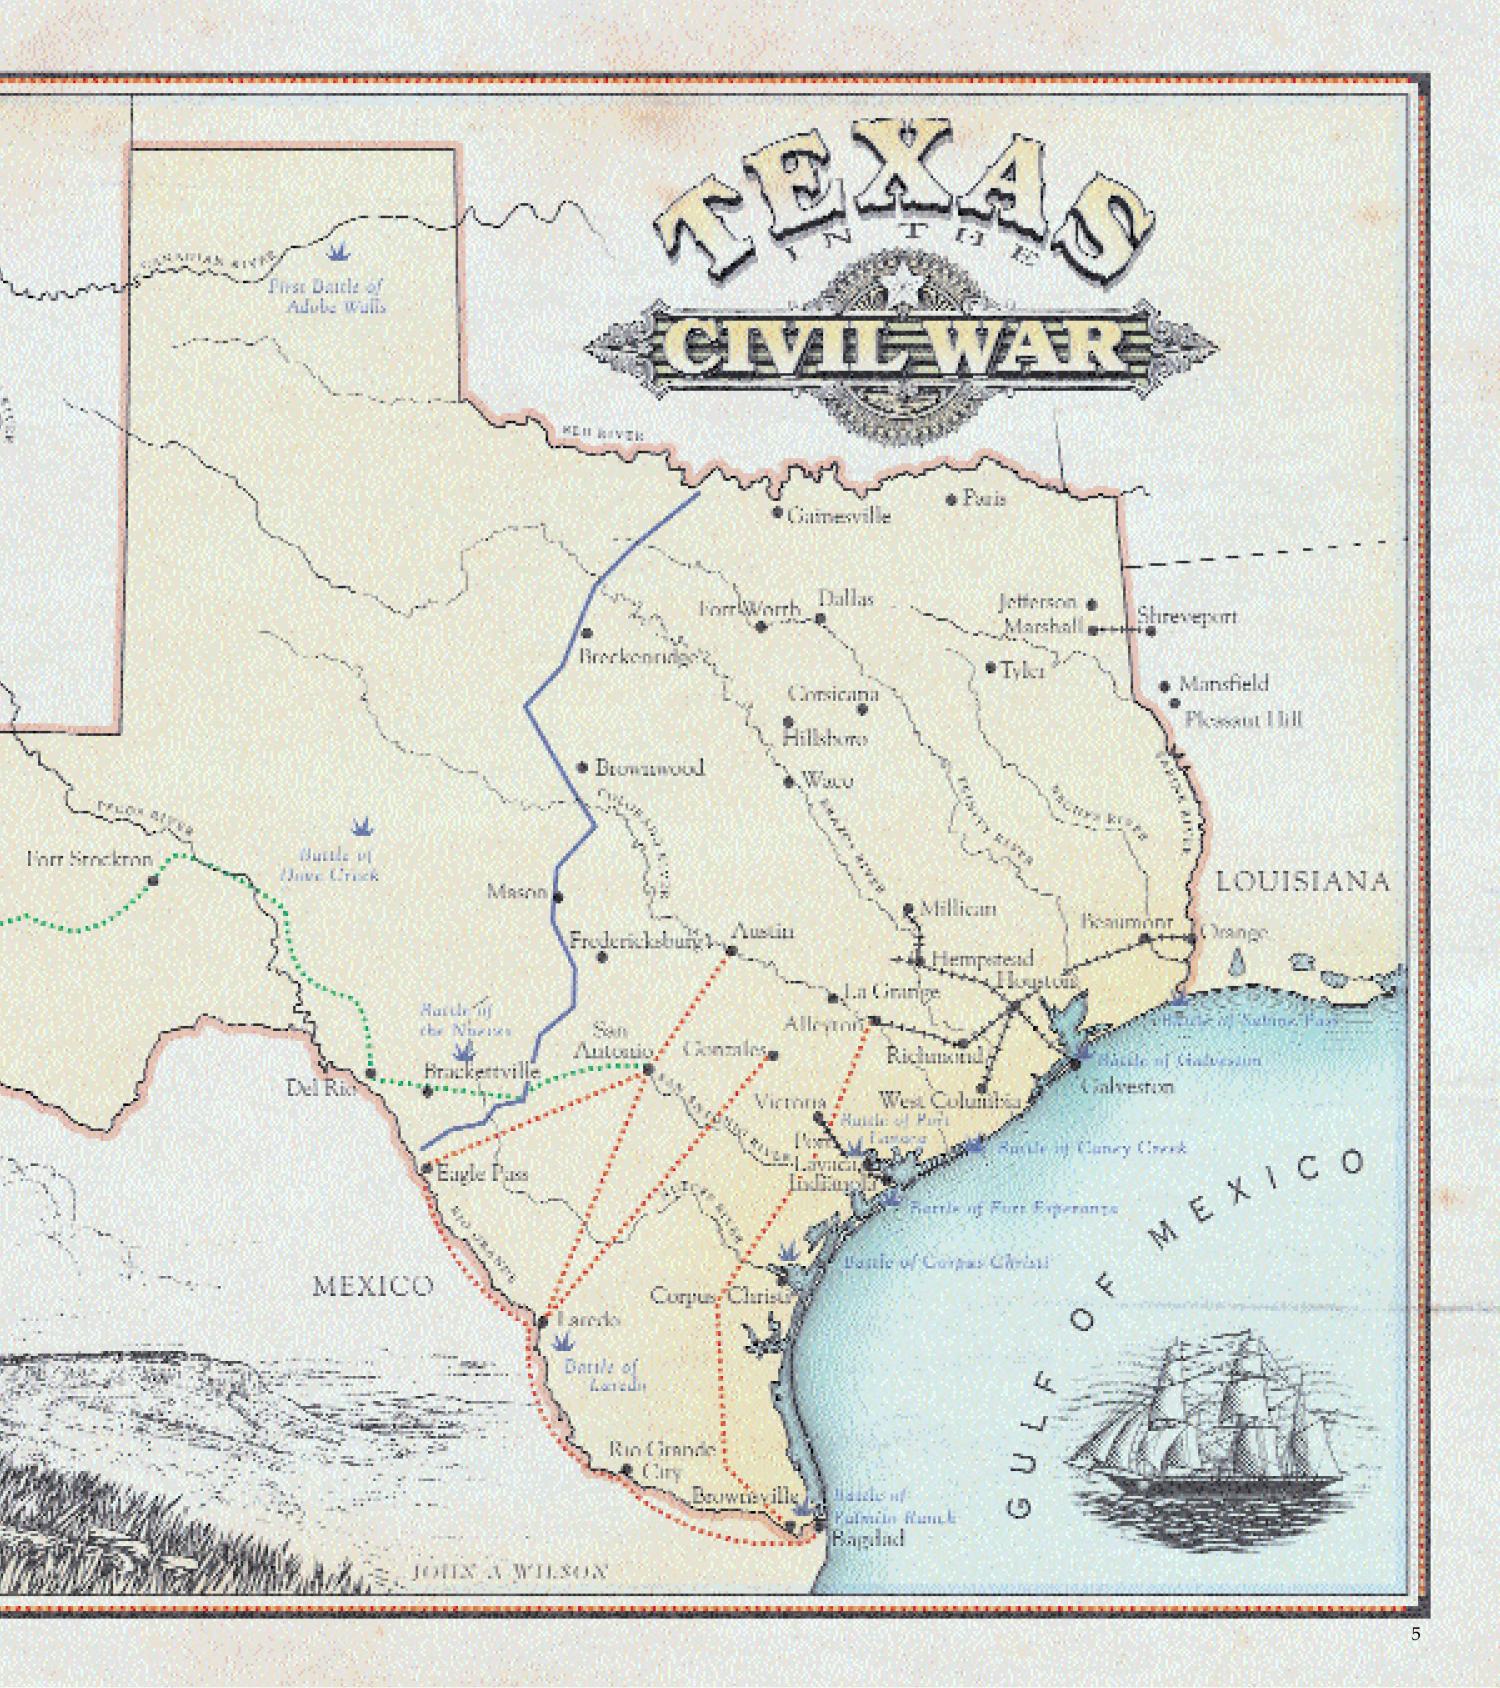 Texas in the Civil War: stories of sacrifice, valor and hope
                                                
                                                    5
                                                